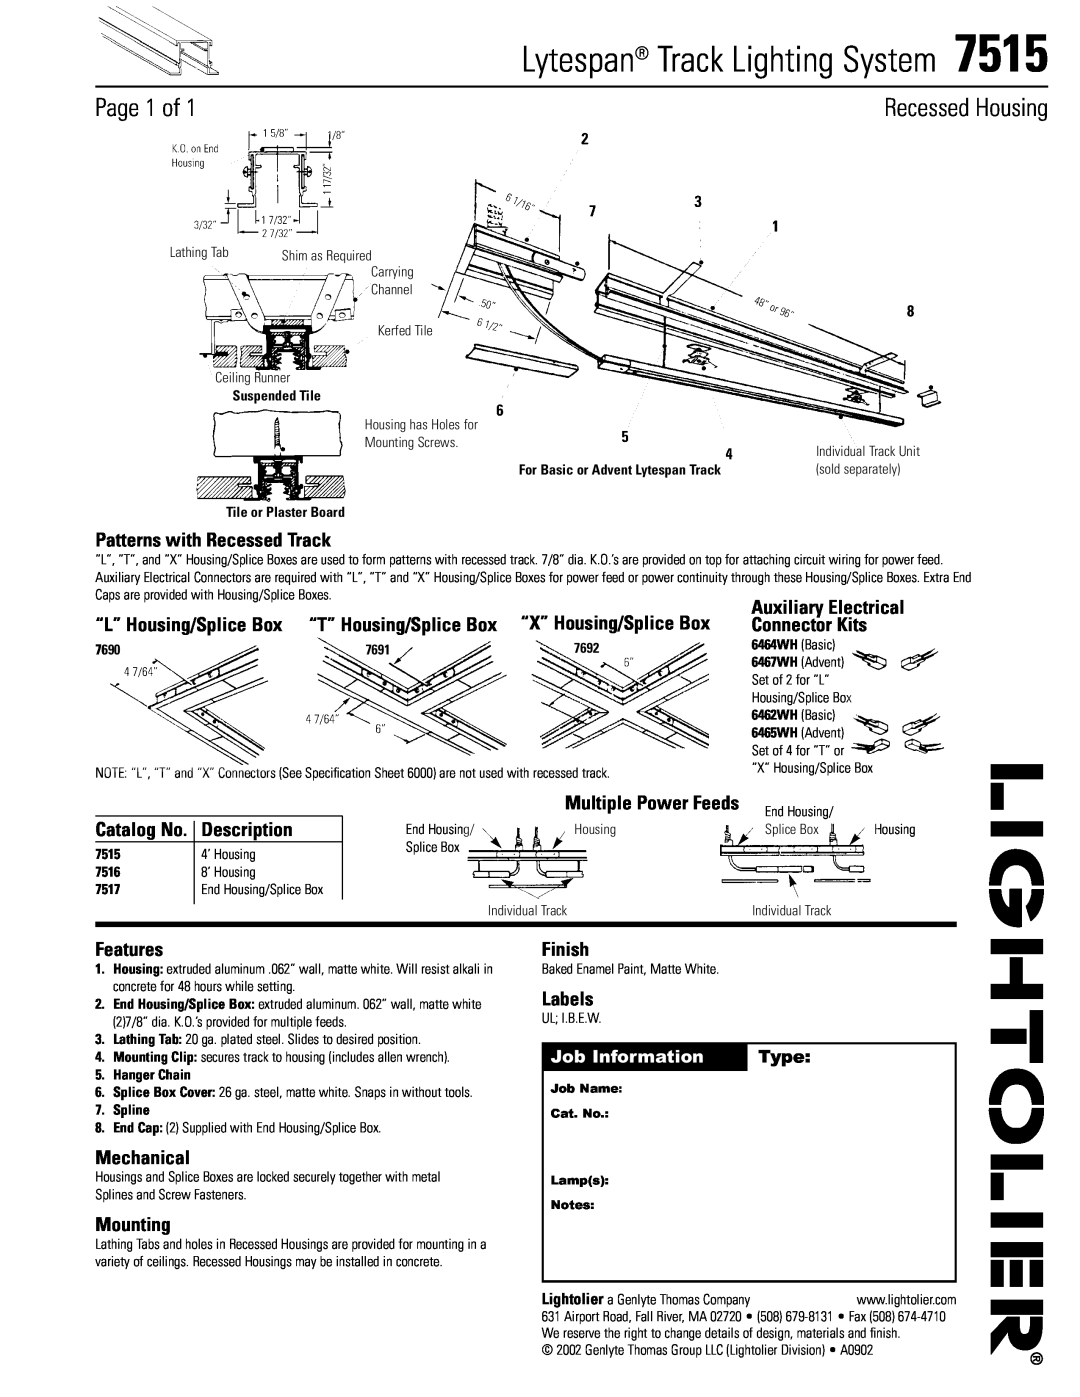 Lightolier 7515 specifications Lytespan Track Lighting System, Page 1 of, Recessed Housing, Patterns with Recessed Track 